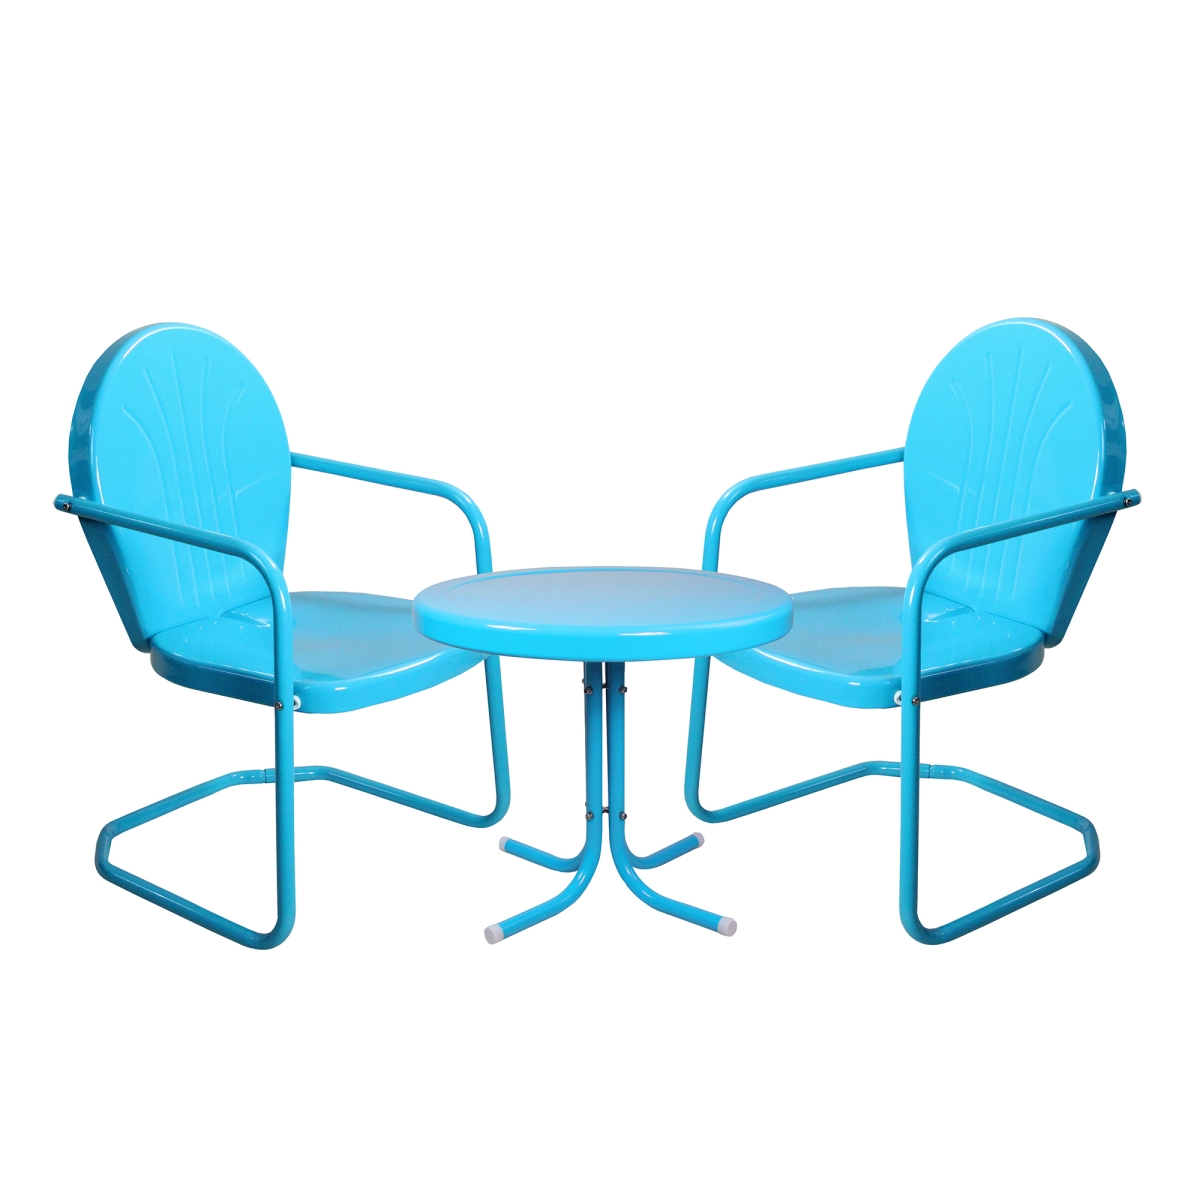 34219556 3-piece Retro Metal Tulip Chairs & Side Table Outdoor Set, Turquoise Blue